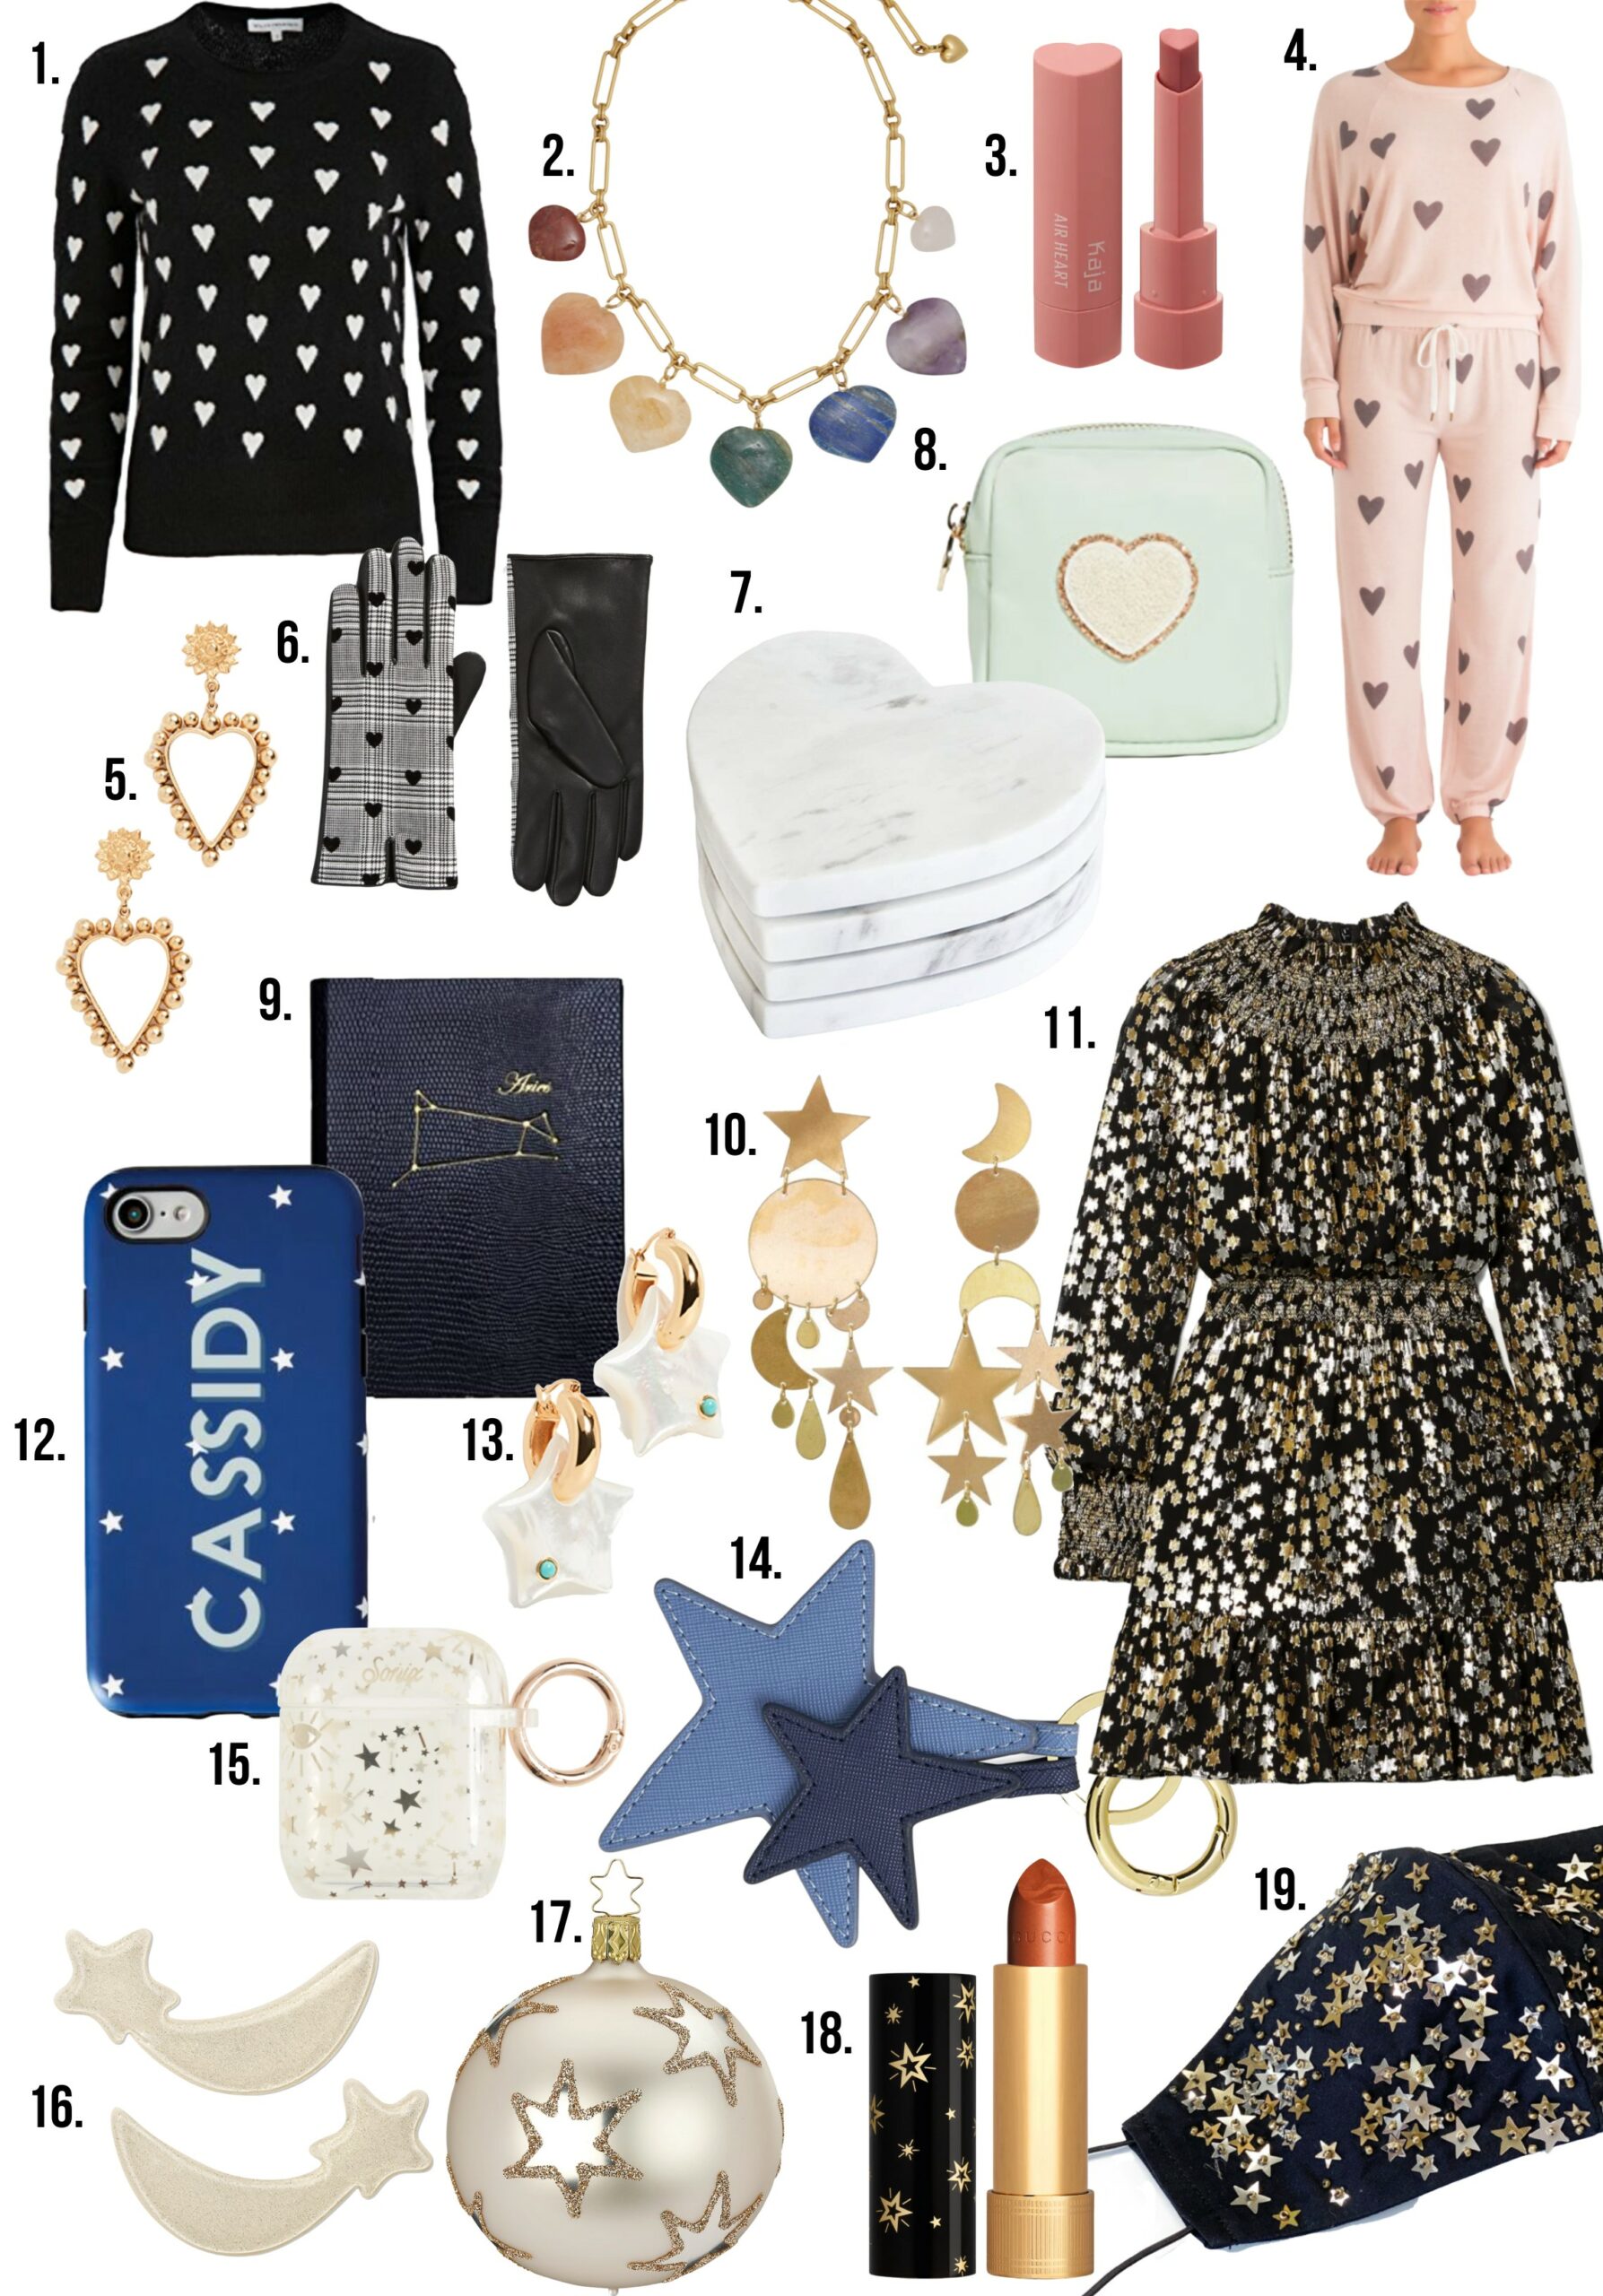 HEARTS & STARS // GIFT GUIDE